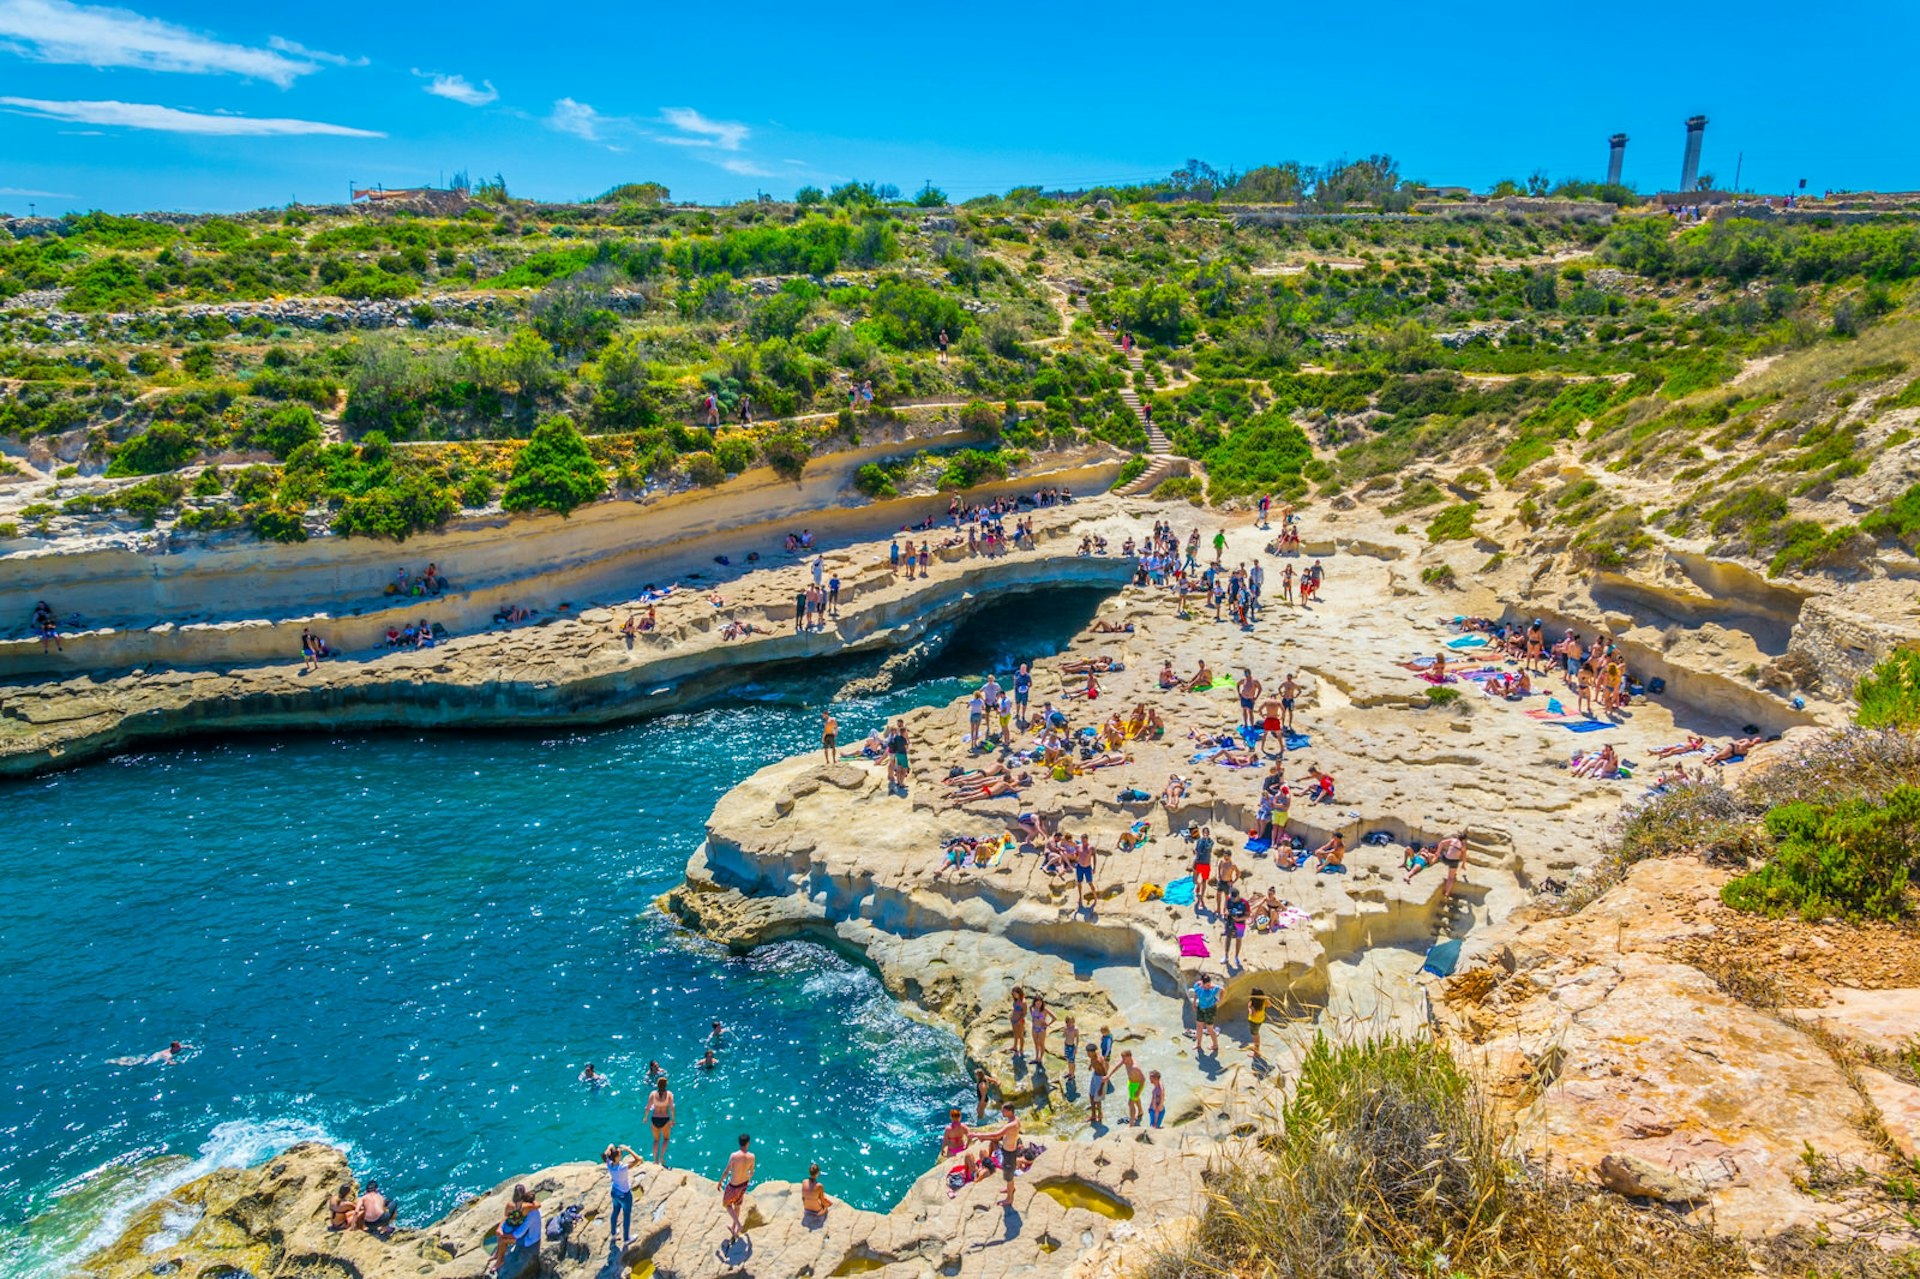 Groups of people relax on the rocks surrounding St Peter's Pool, a naturally formed sea pool